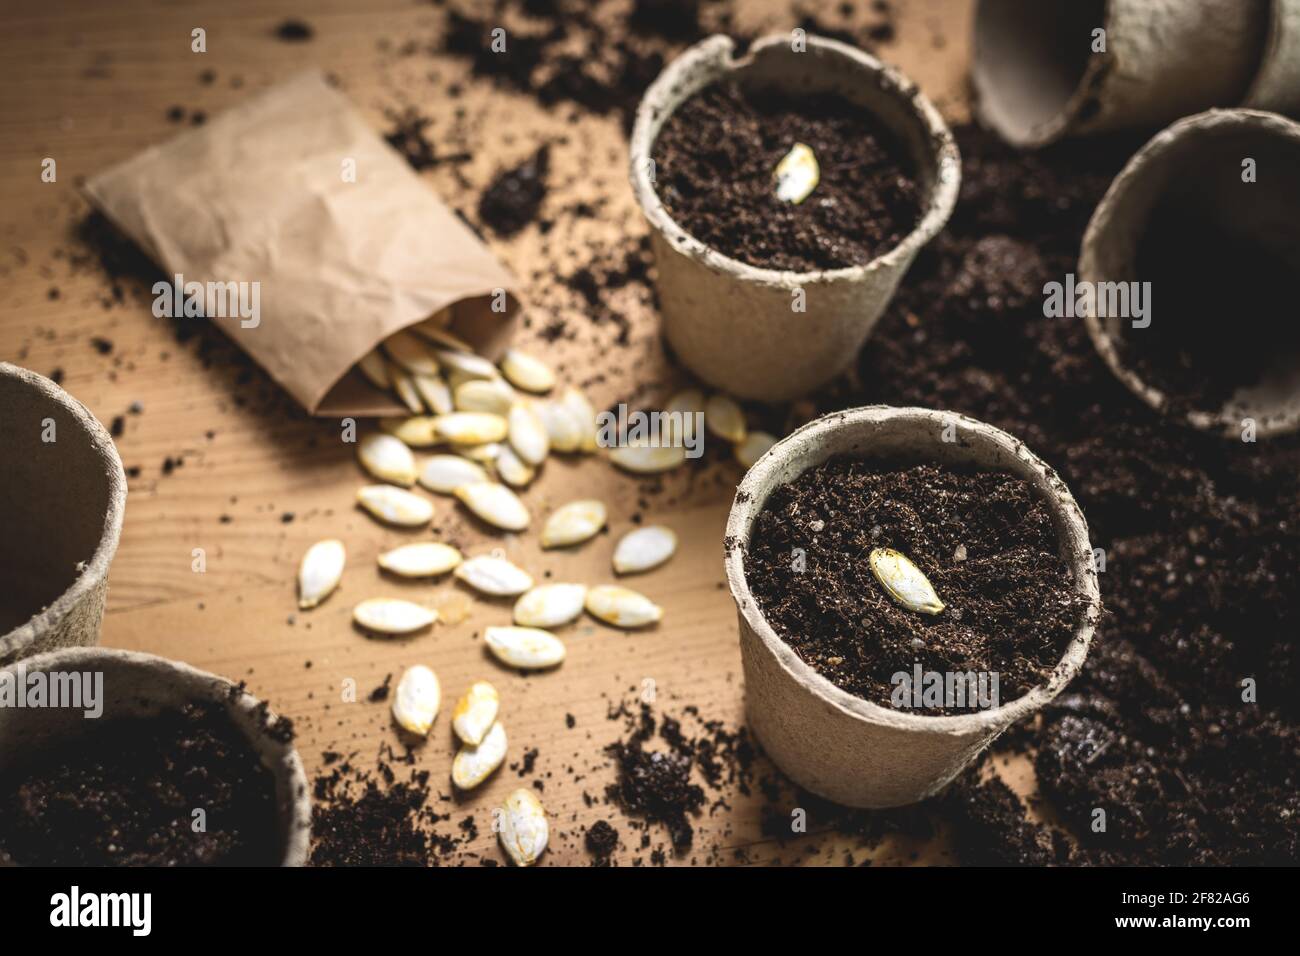 Planting pumpkin seed. Sowing seeds into peat pot on table. Gardening and agricultural activity at springtime Stock Photo